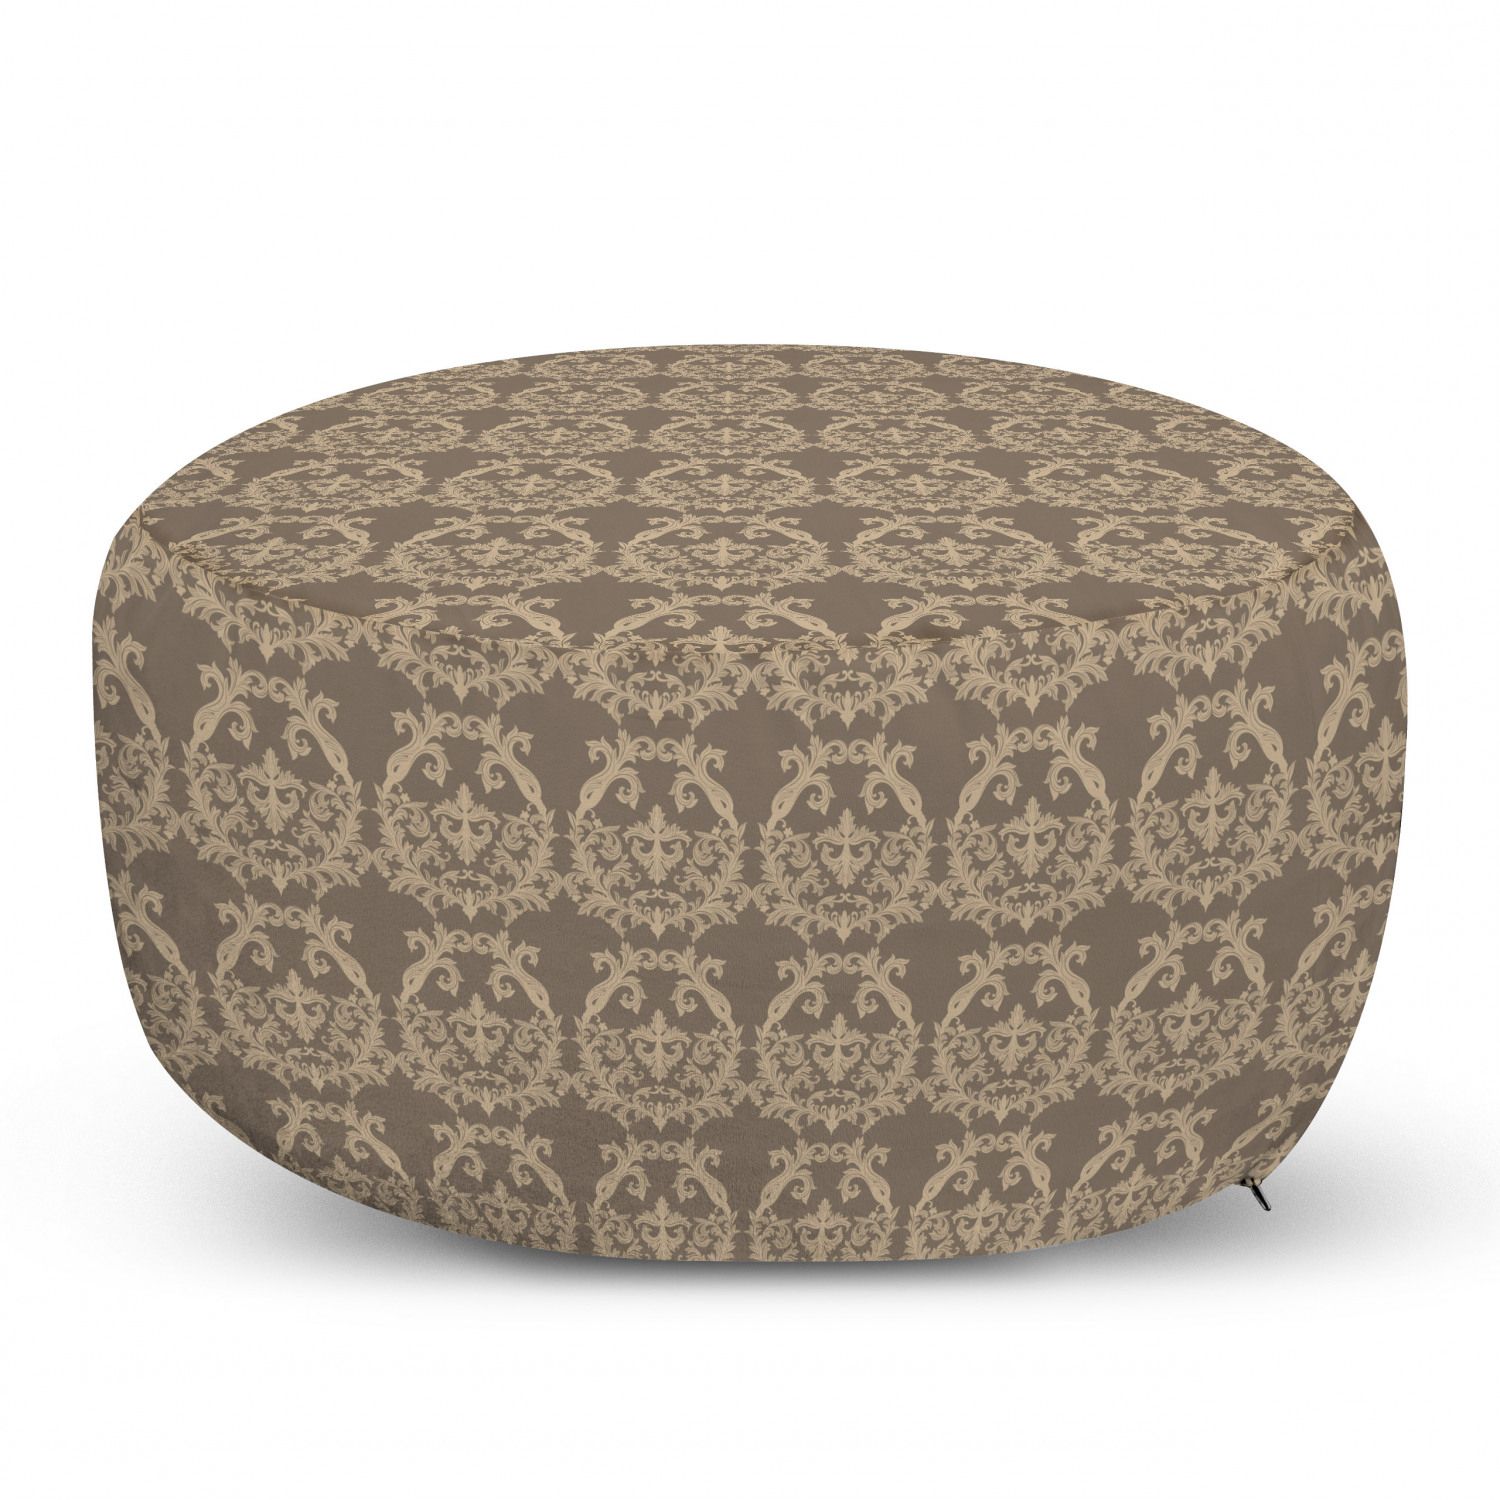 Taupe Ottoman Pouf, Royal Victorian Botanical Design Exquisite Floral Throughout Warm Brown Cowhide Pouf Ottomans (View 15 of 20)